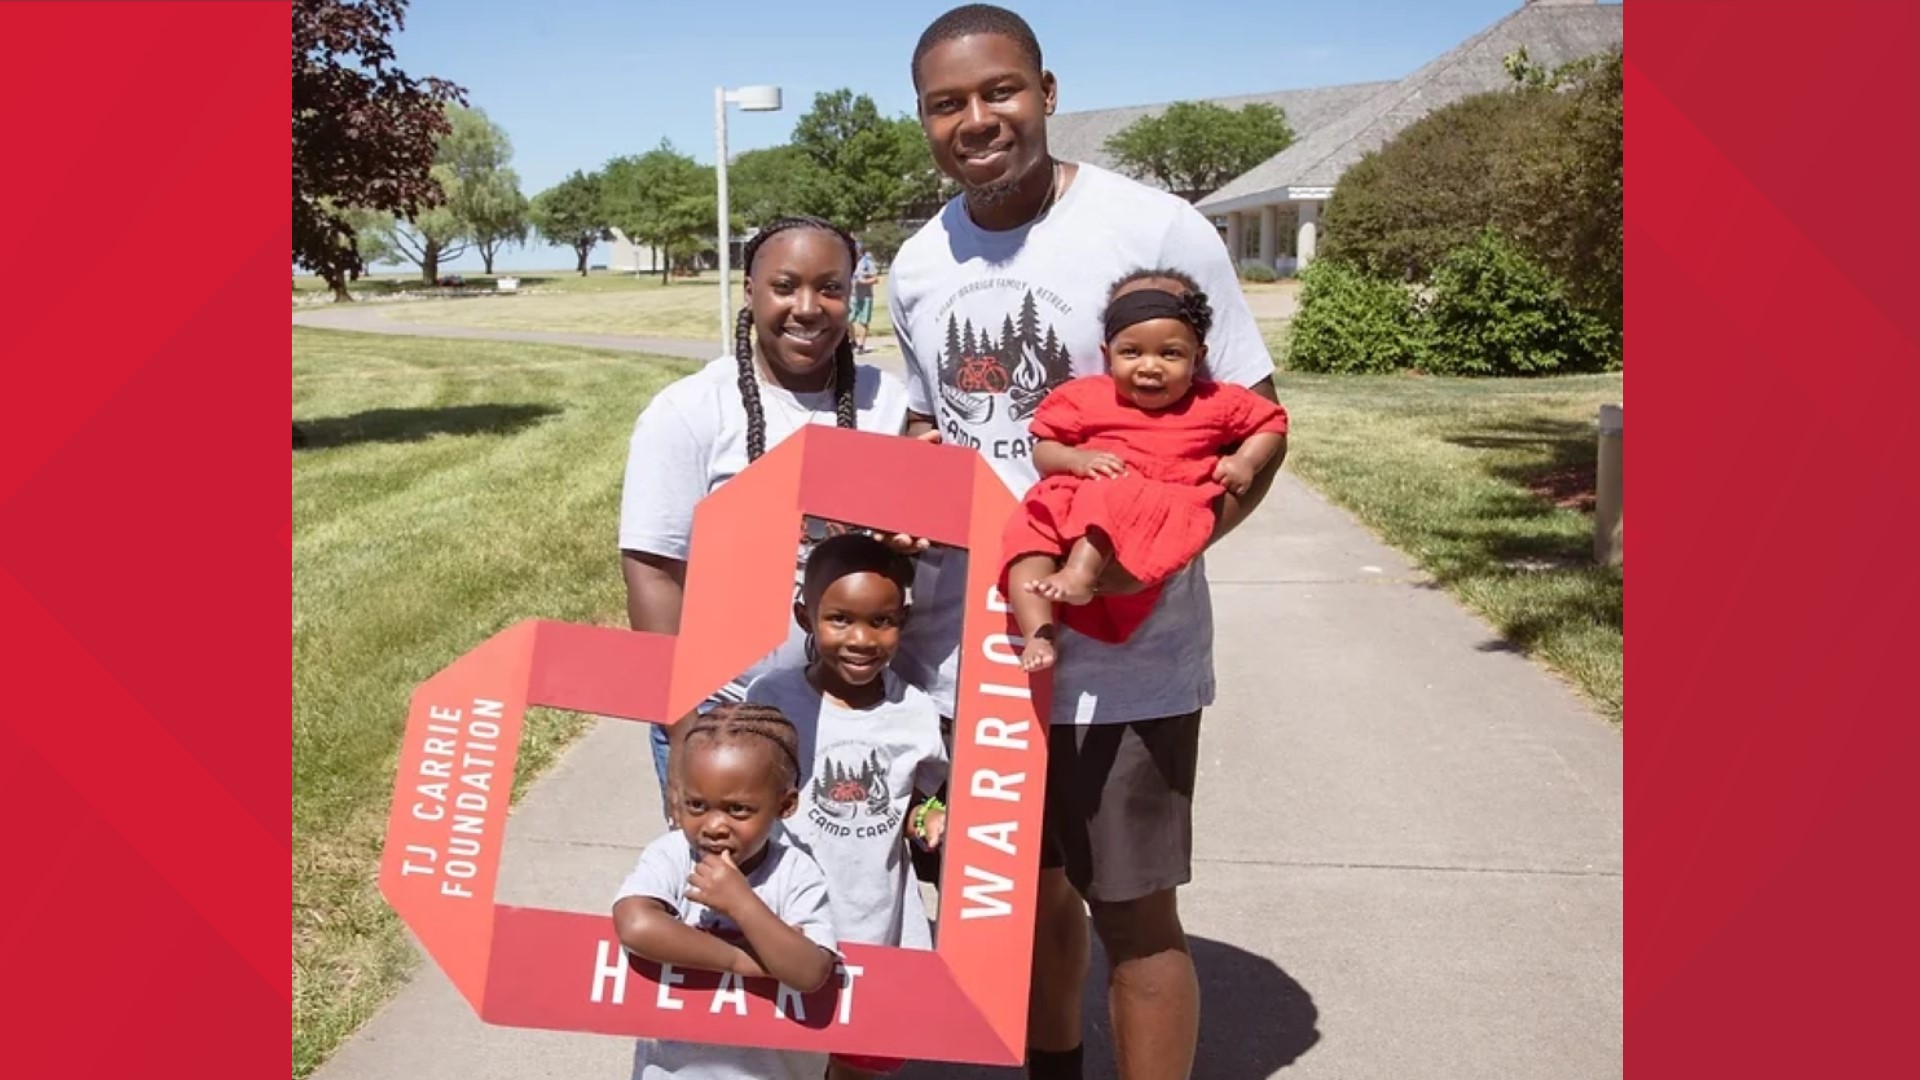 Saturday's Cavs 50/50 raffle will benefit the TJ Carrie Foundation, dedicated to caring for children and families living with heart conditions.